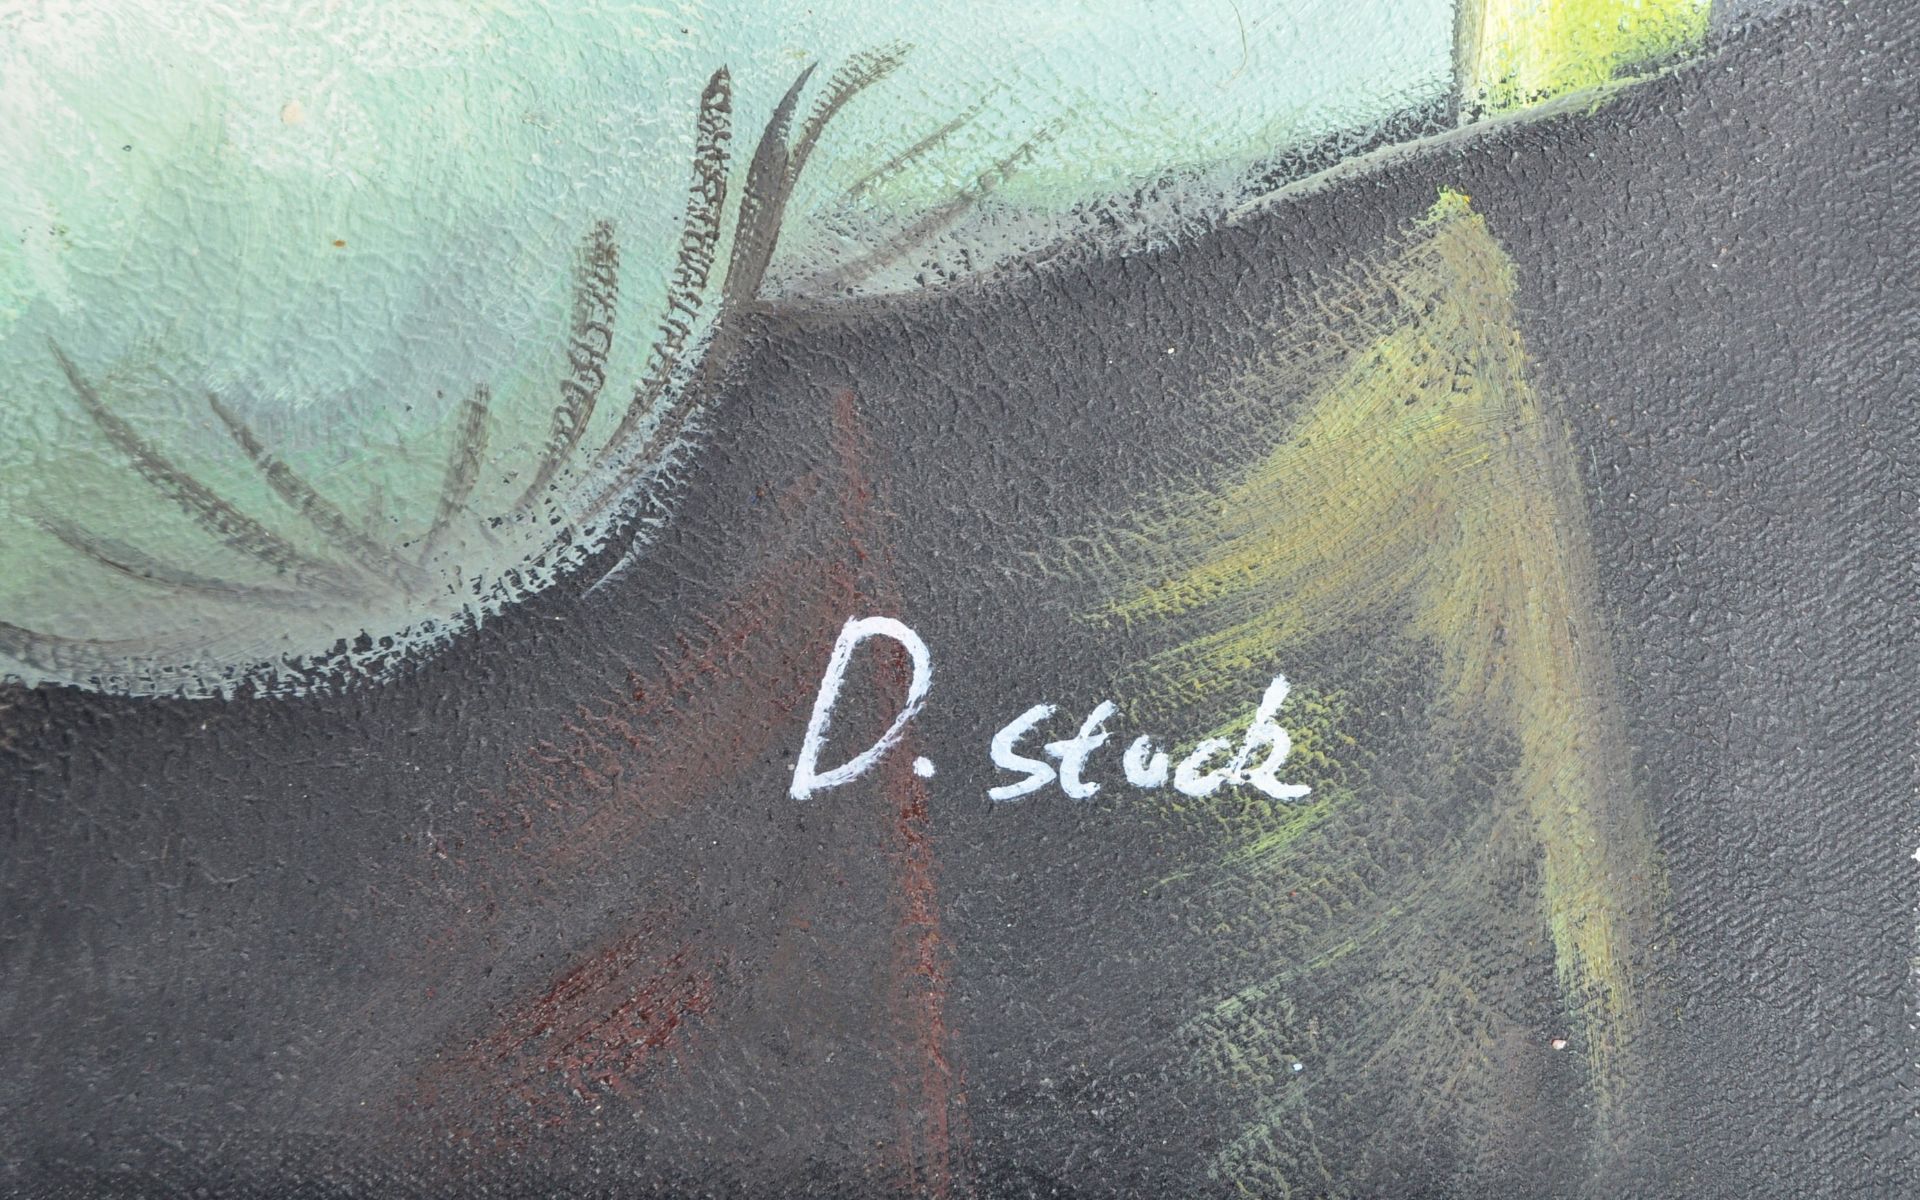 D STACK - 20TH CENTURY SURREAL OIL ON CANVAS PAINTING - Image 5 of 7